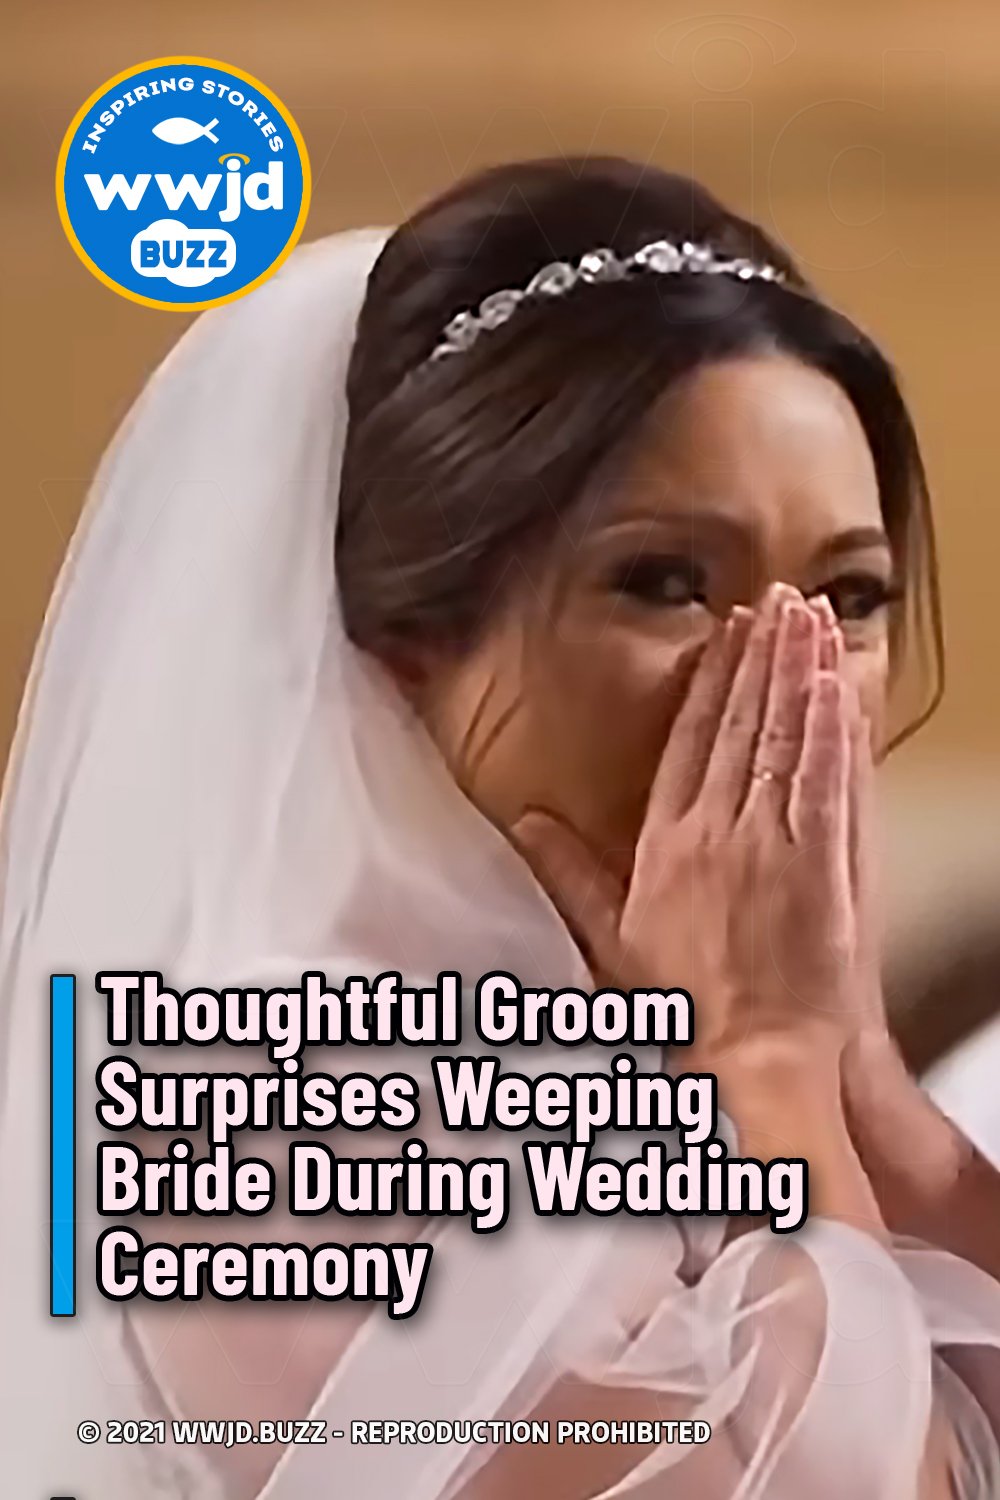 Thoughtful Groom Surprises Weeping Bride During Wedding Ceremony